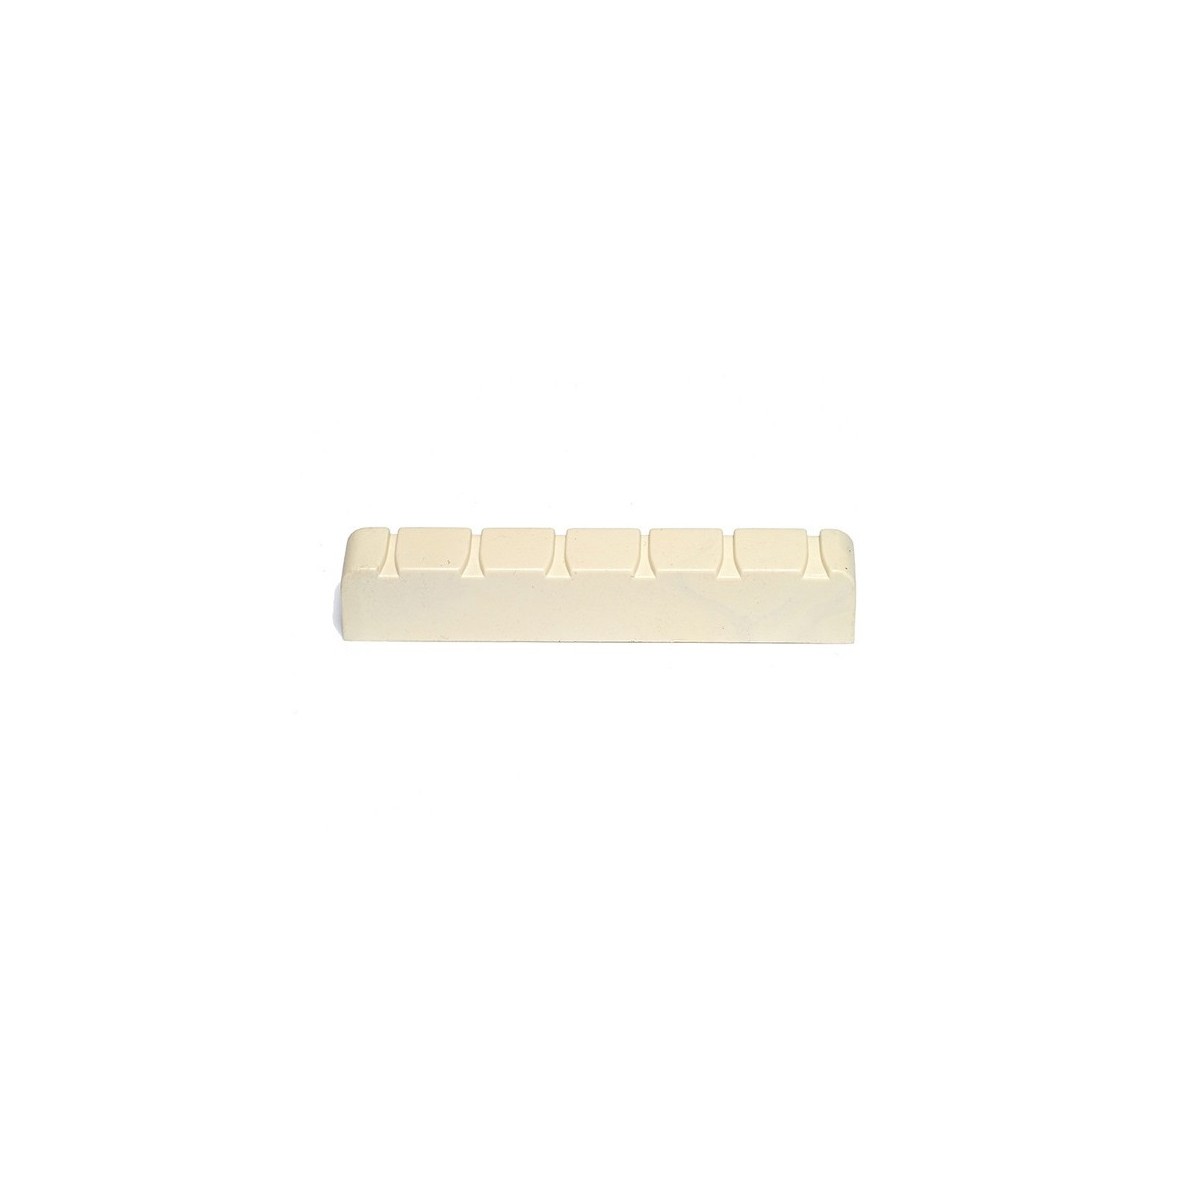 NUBONE NUTS LC6220 CLASSICAL SLOTTED